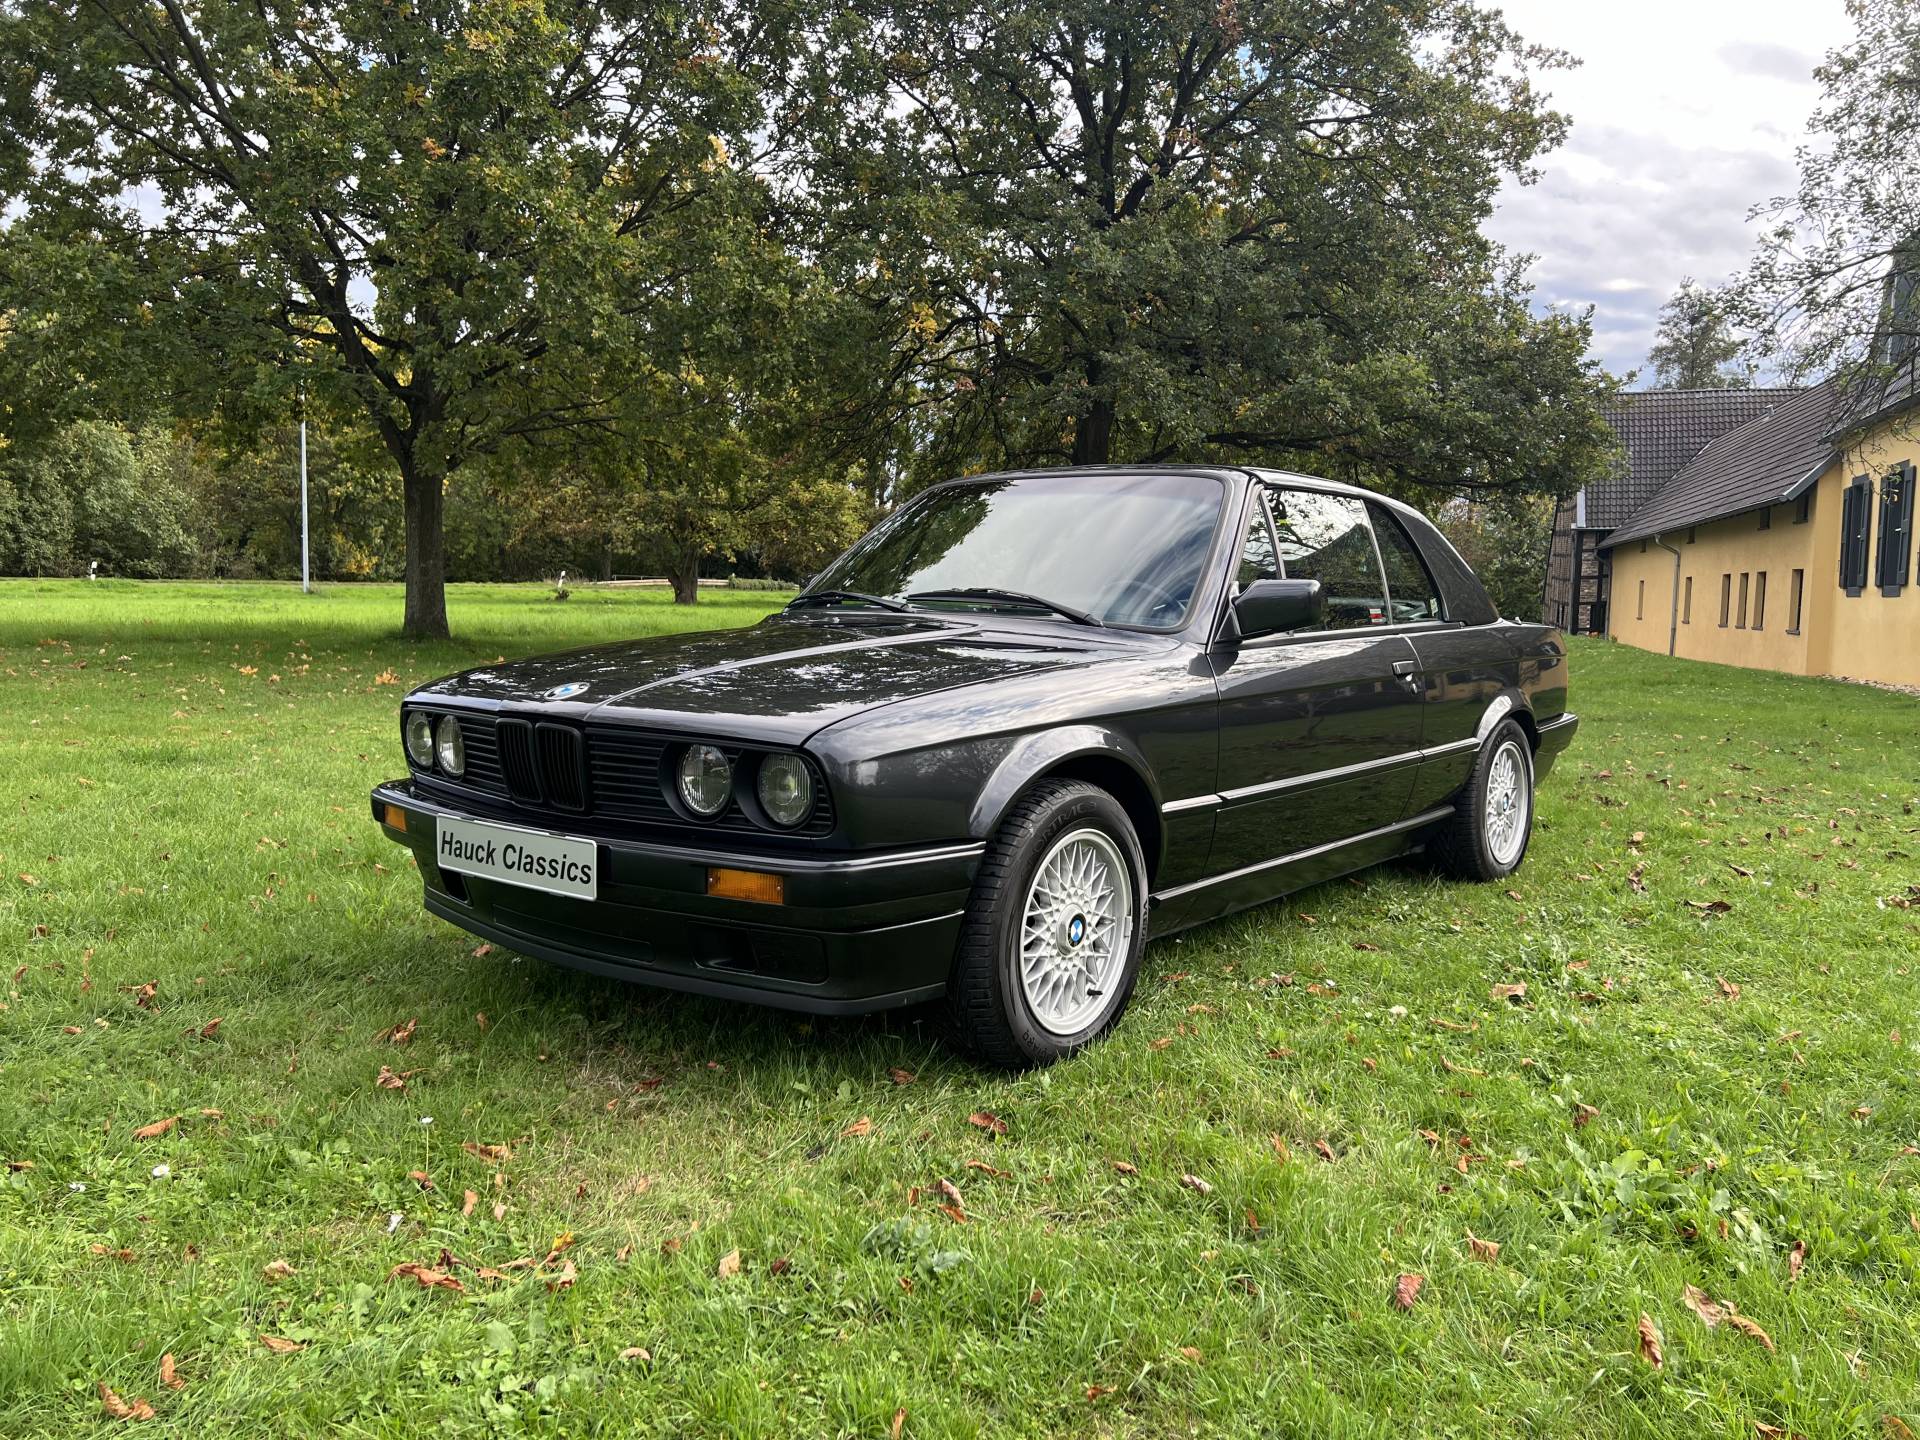 For Sale BMW 318i 1992 offered for GBP 15178